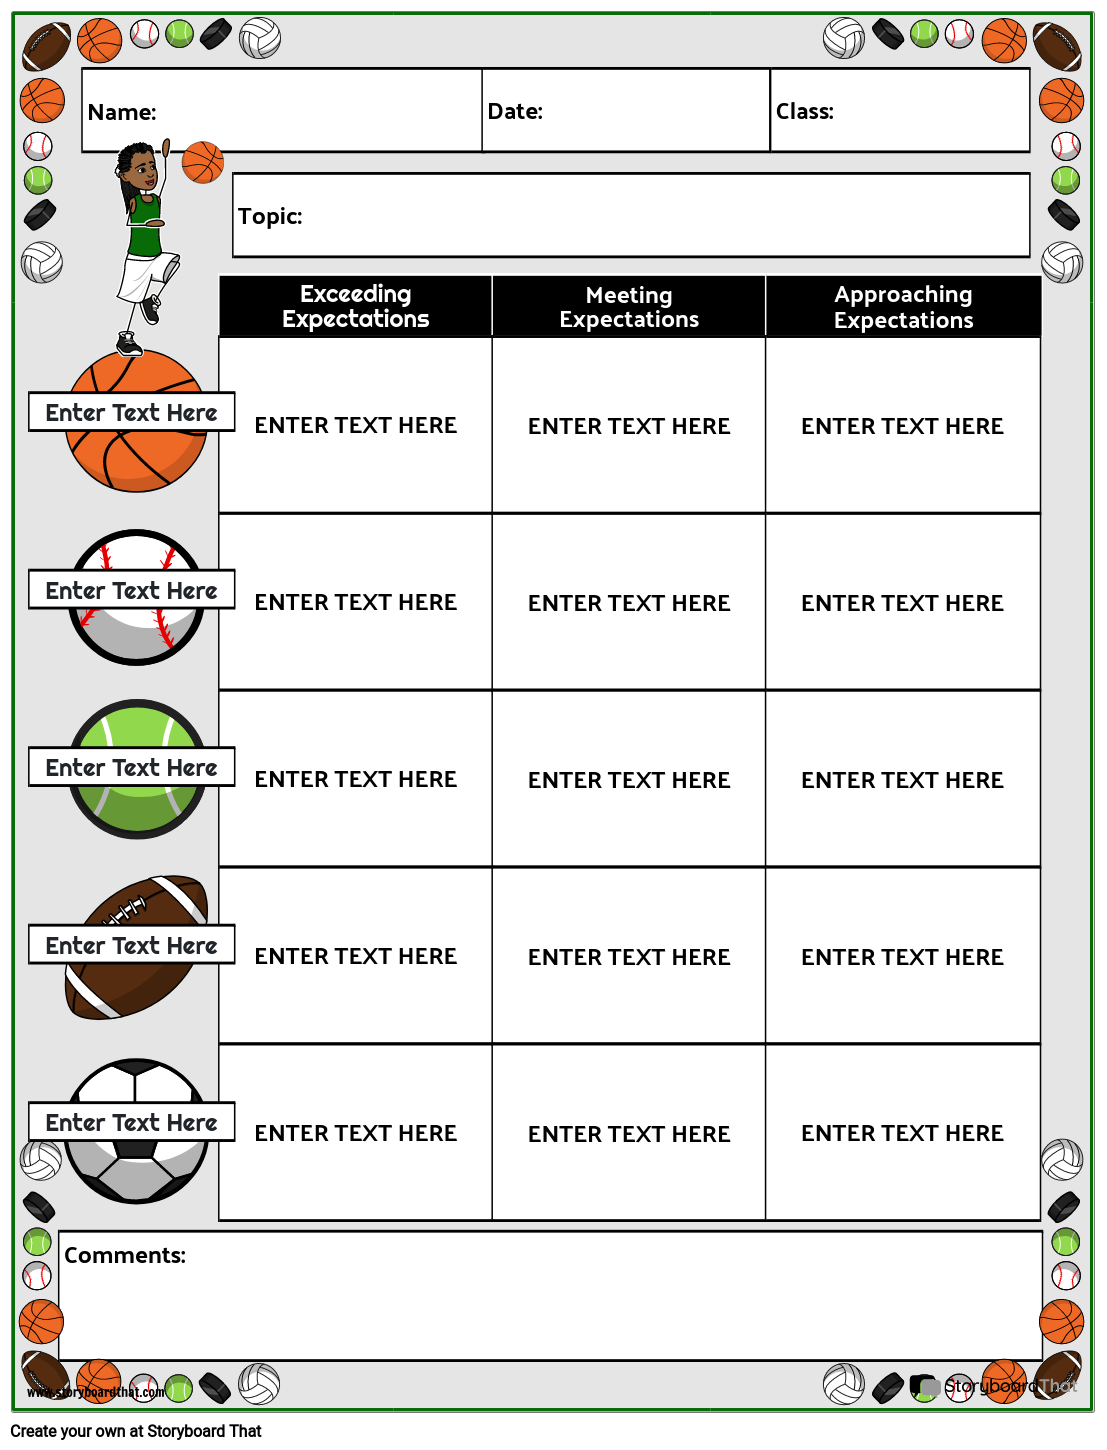 rubric-portrait-color-2-storyboard-by-worksheet-templates